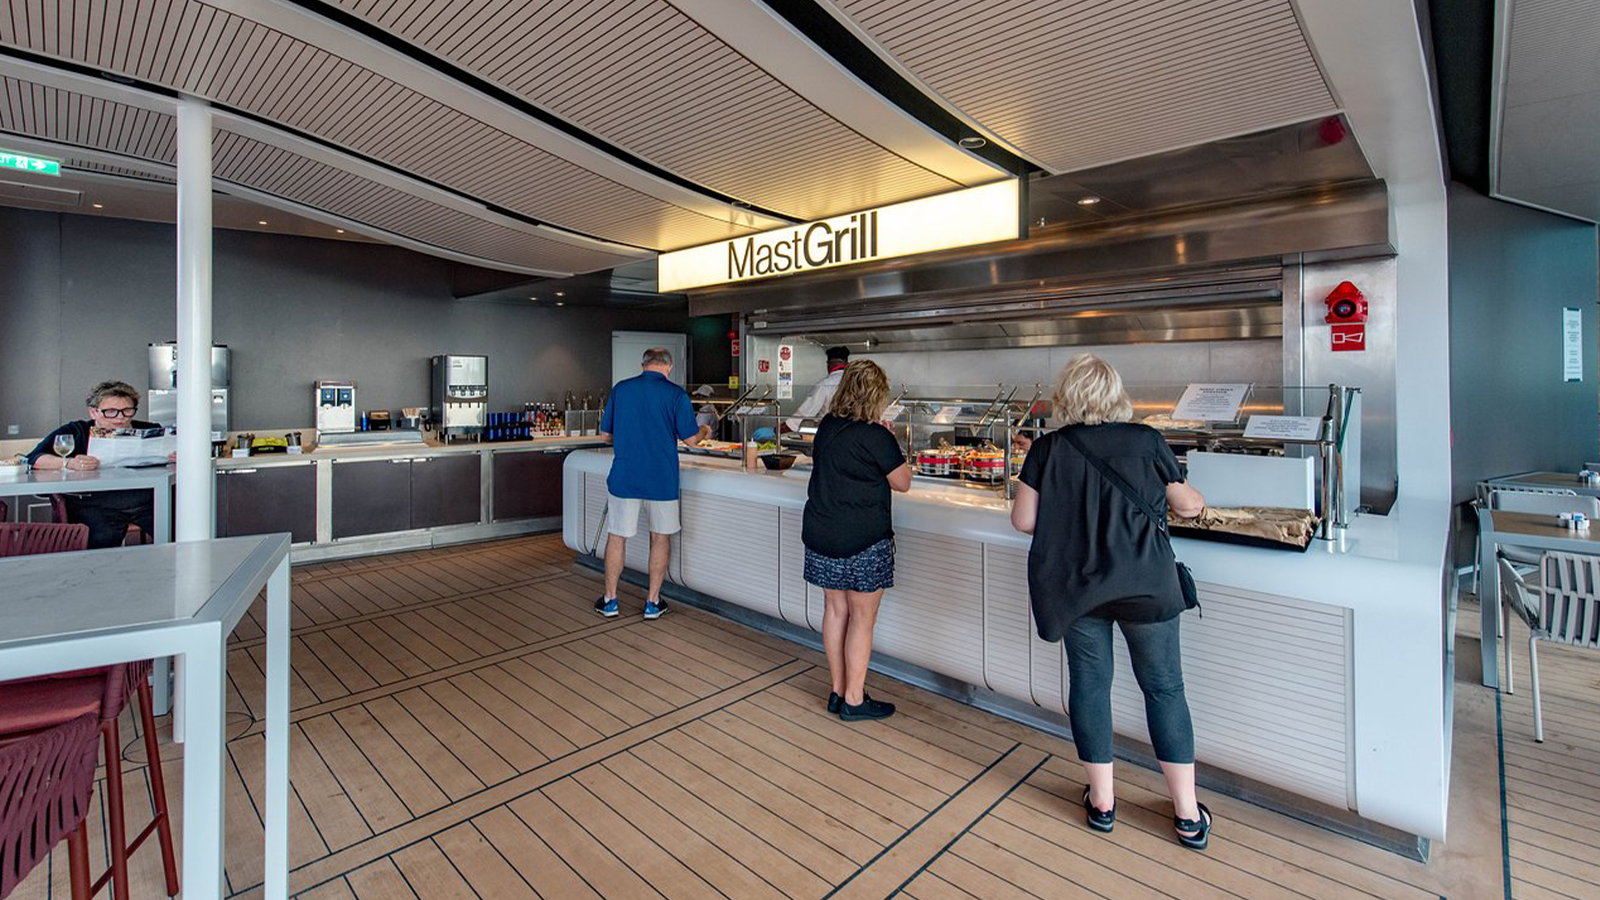 Mast Grill on the Celebrity Equinox